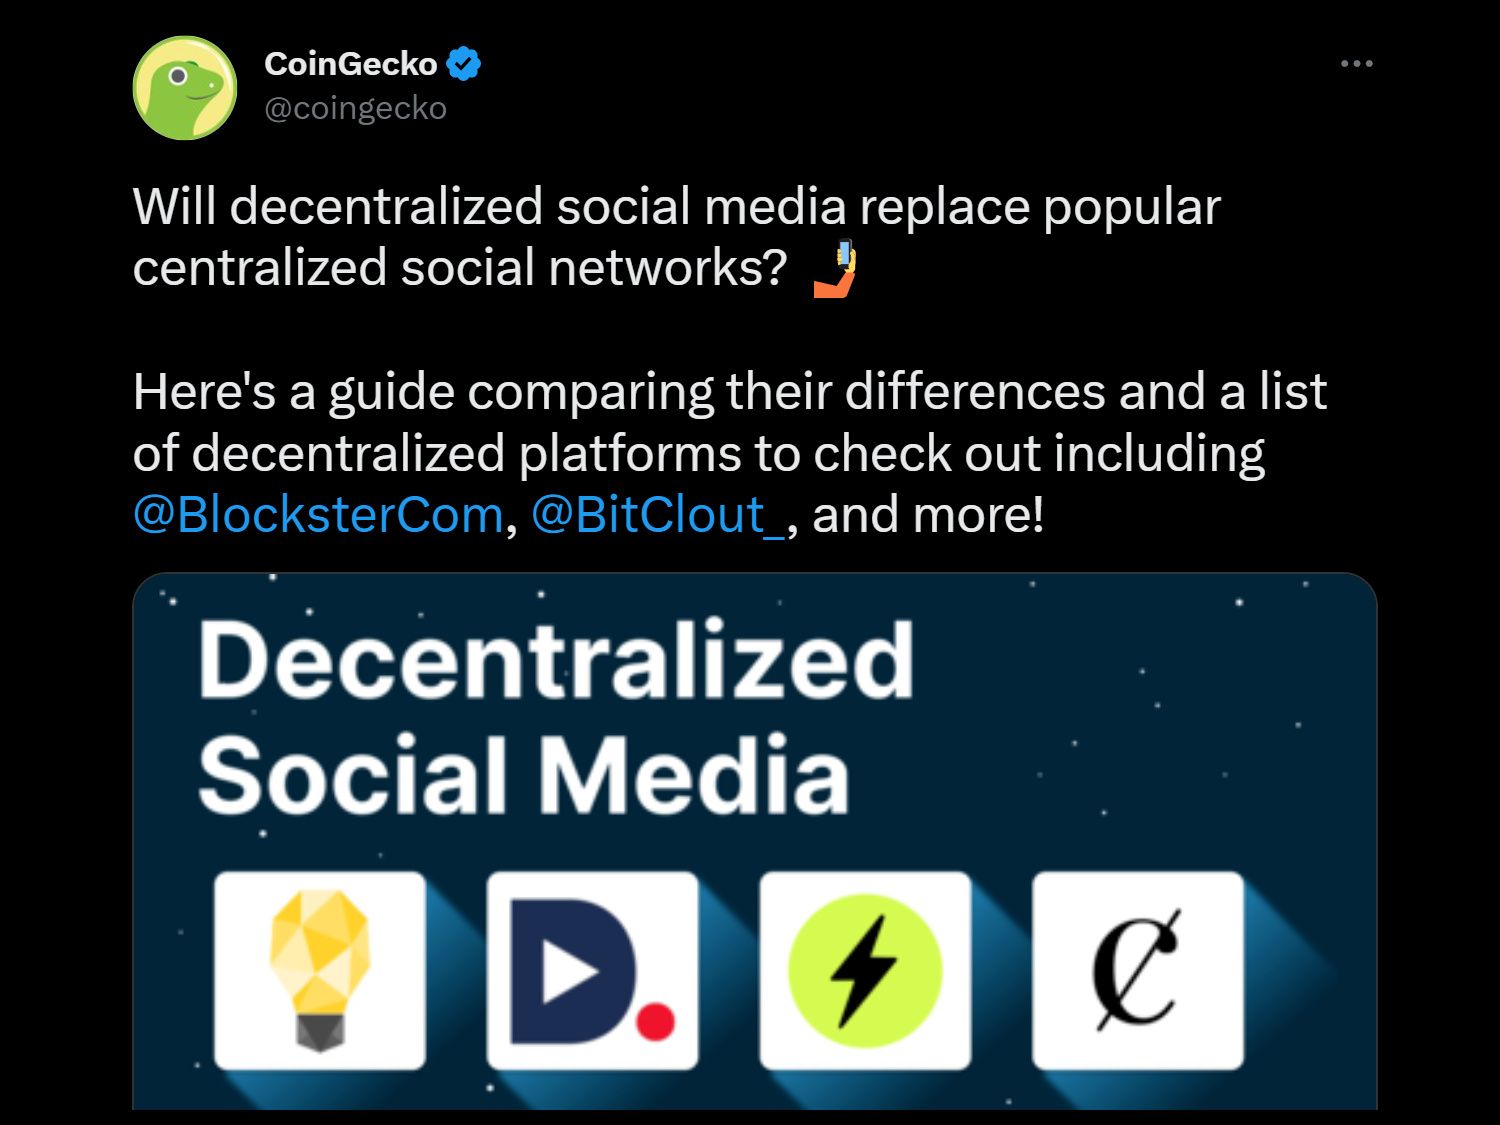 @vikisecrets/call-to-action-coingecko-published-a-list-of-decentralized-social-media-but-ignored-hive-ask-them-on-twitter-politely-to-incl